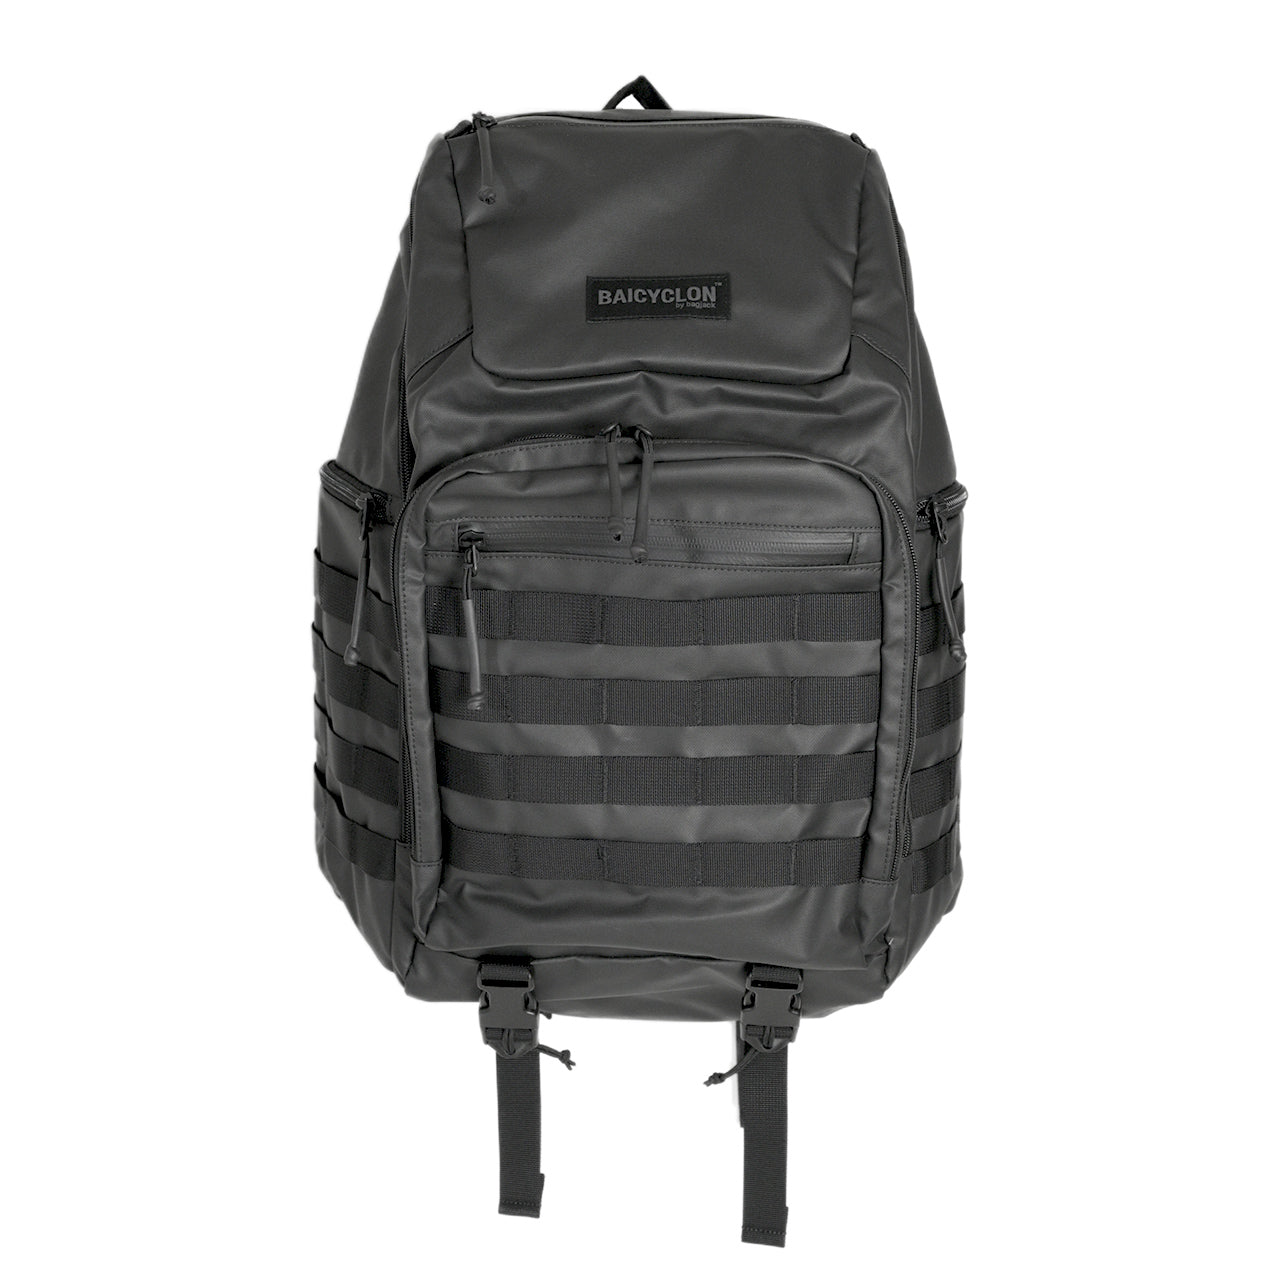 BAICYCLON by Bagjack バイシクロン by バッグジャック モール バックパック molle backpack  BCL-24 【送料無料】